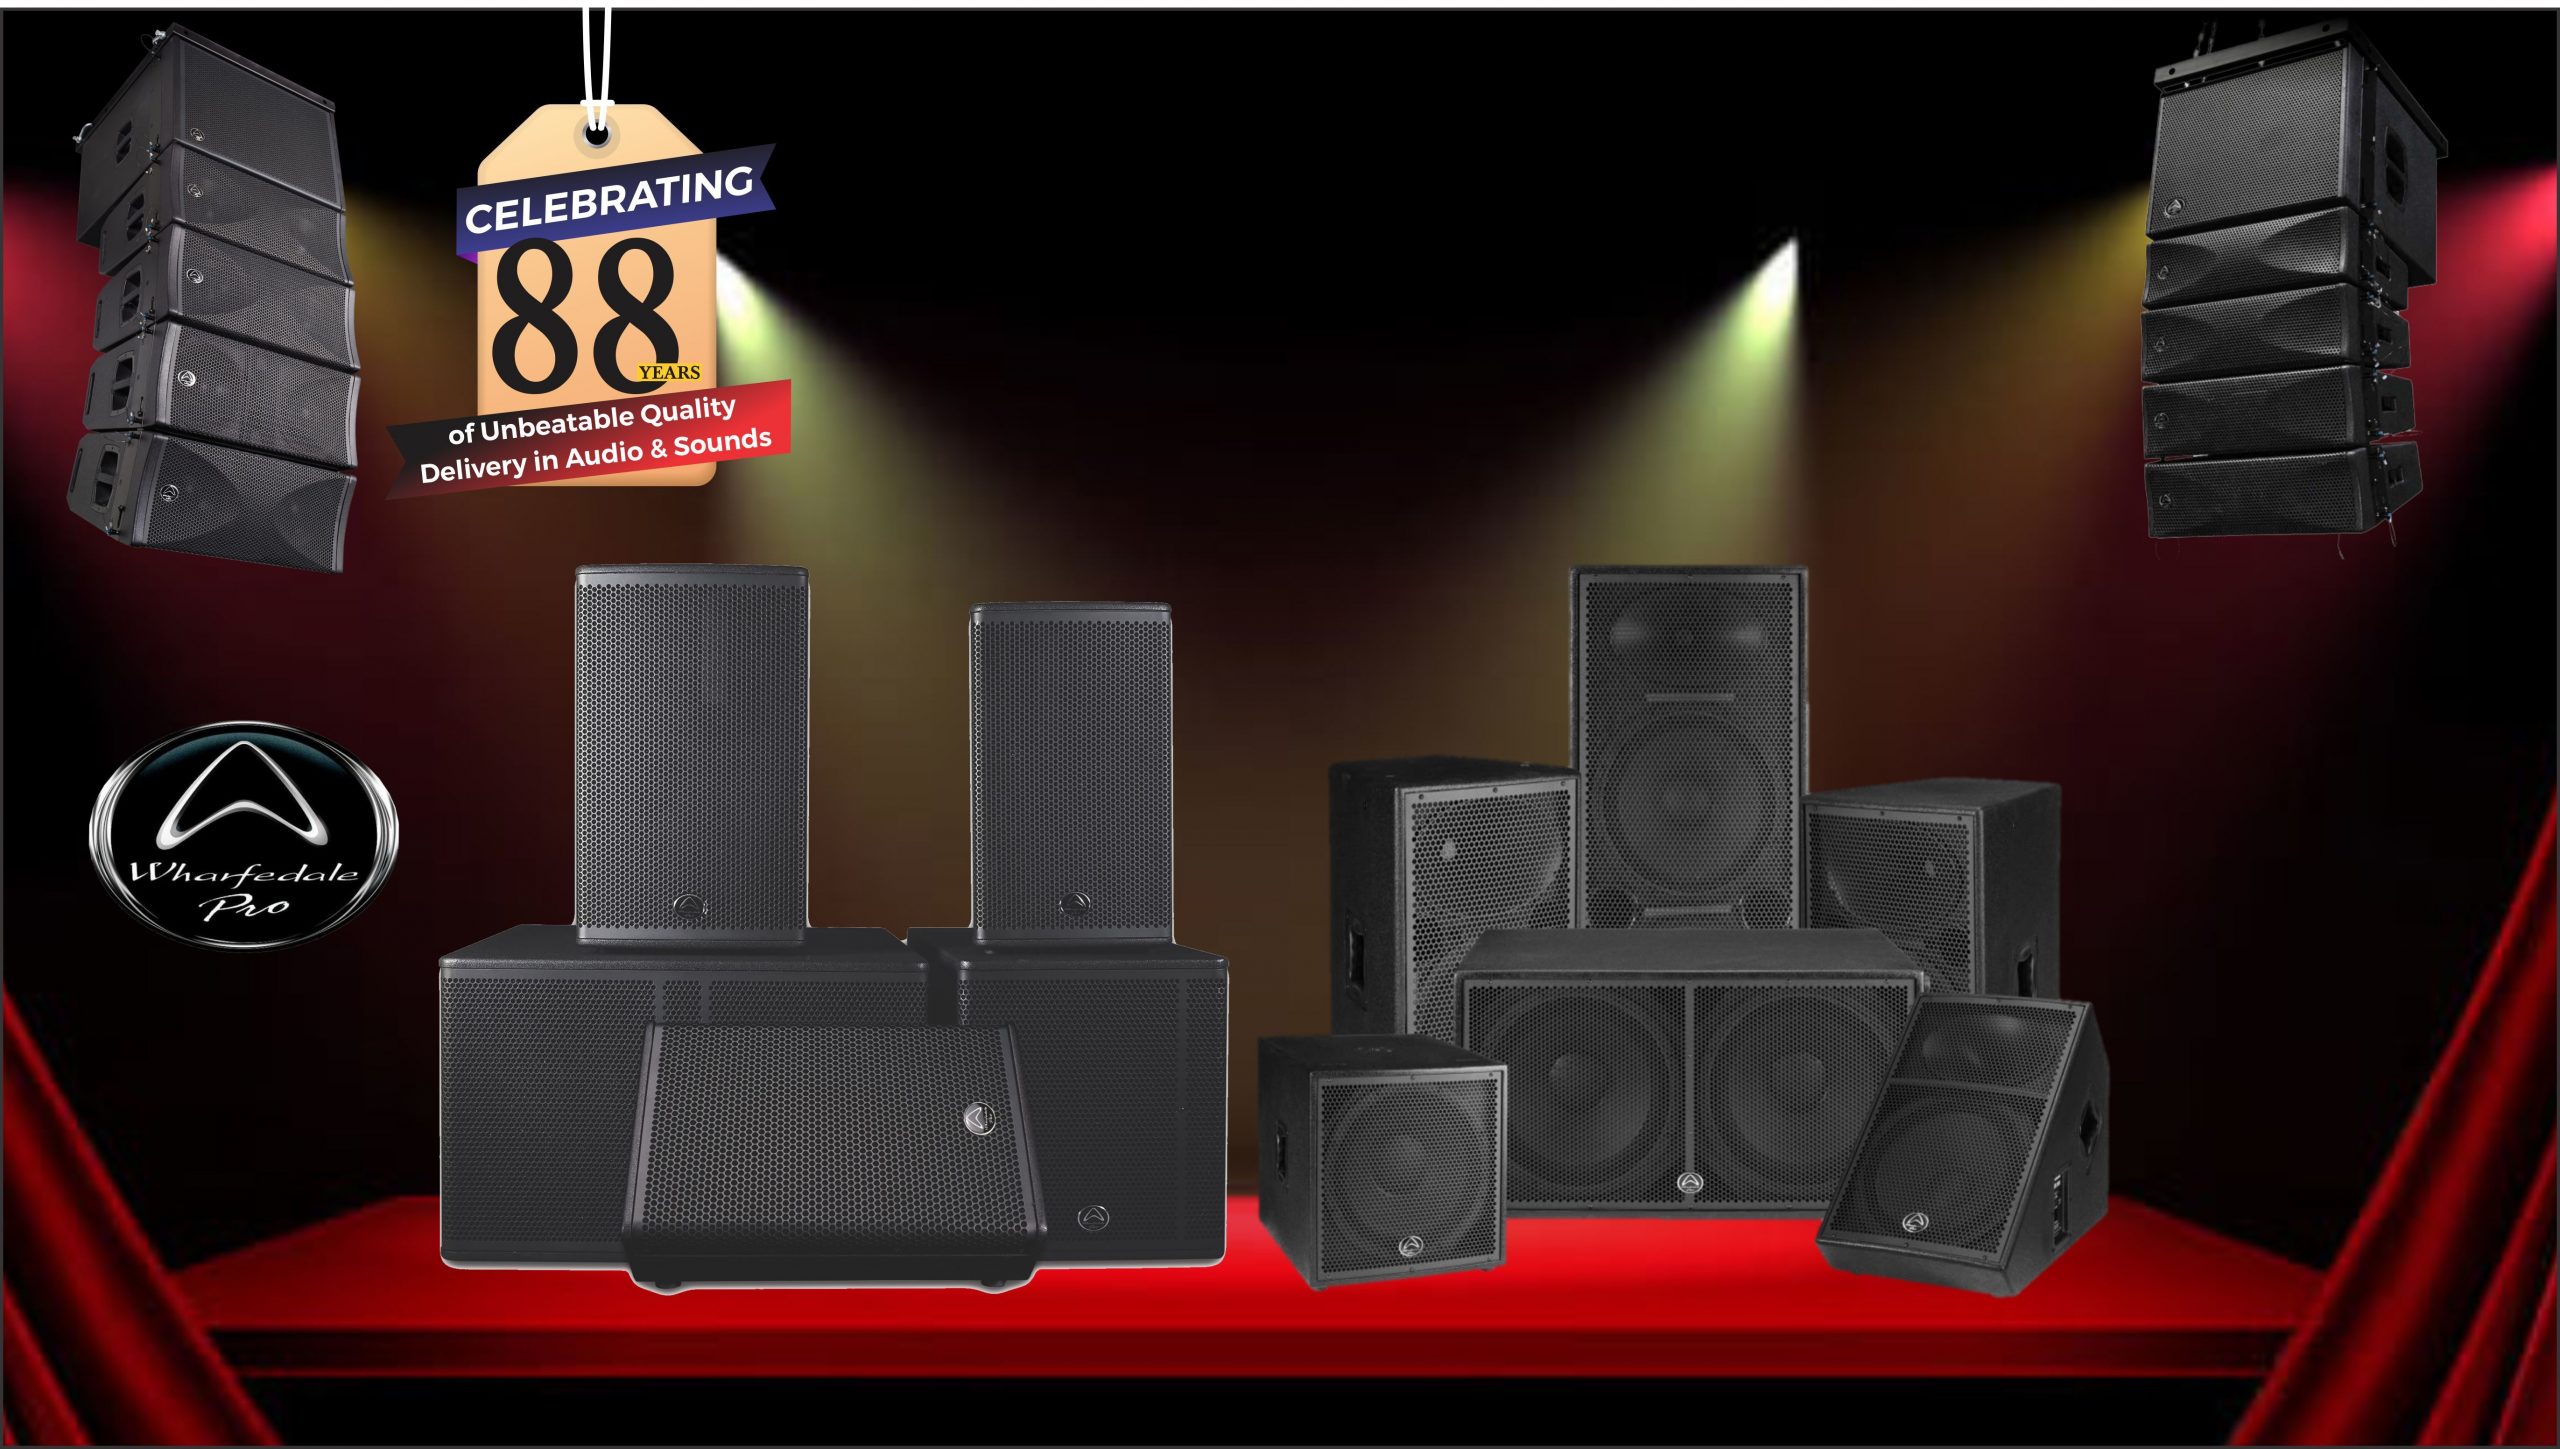 wharfedale pro celebrating 88 years of Unbeatable Quality Delivery in Audio & Sounds